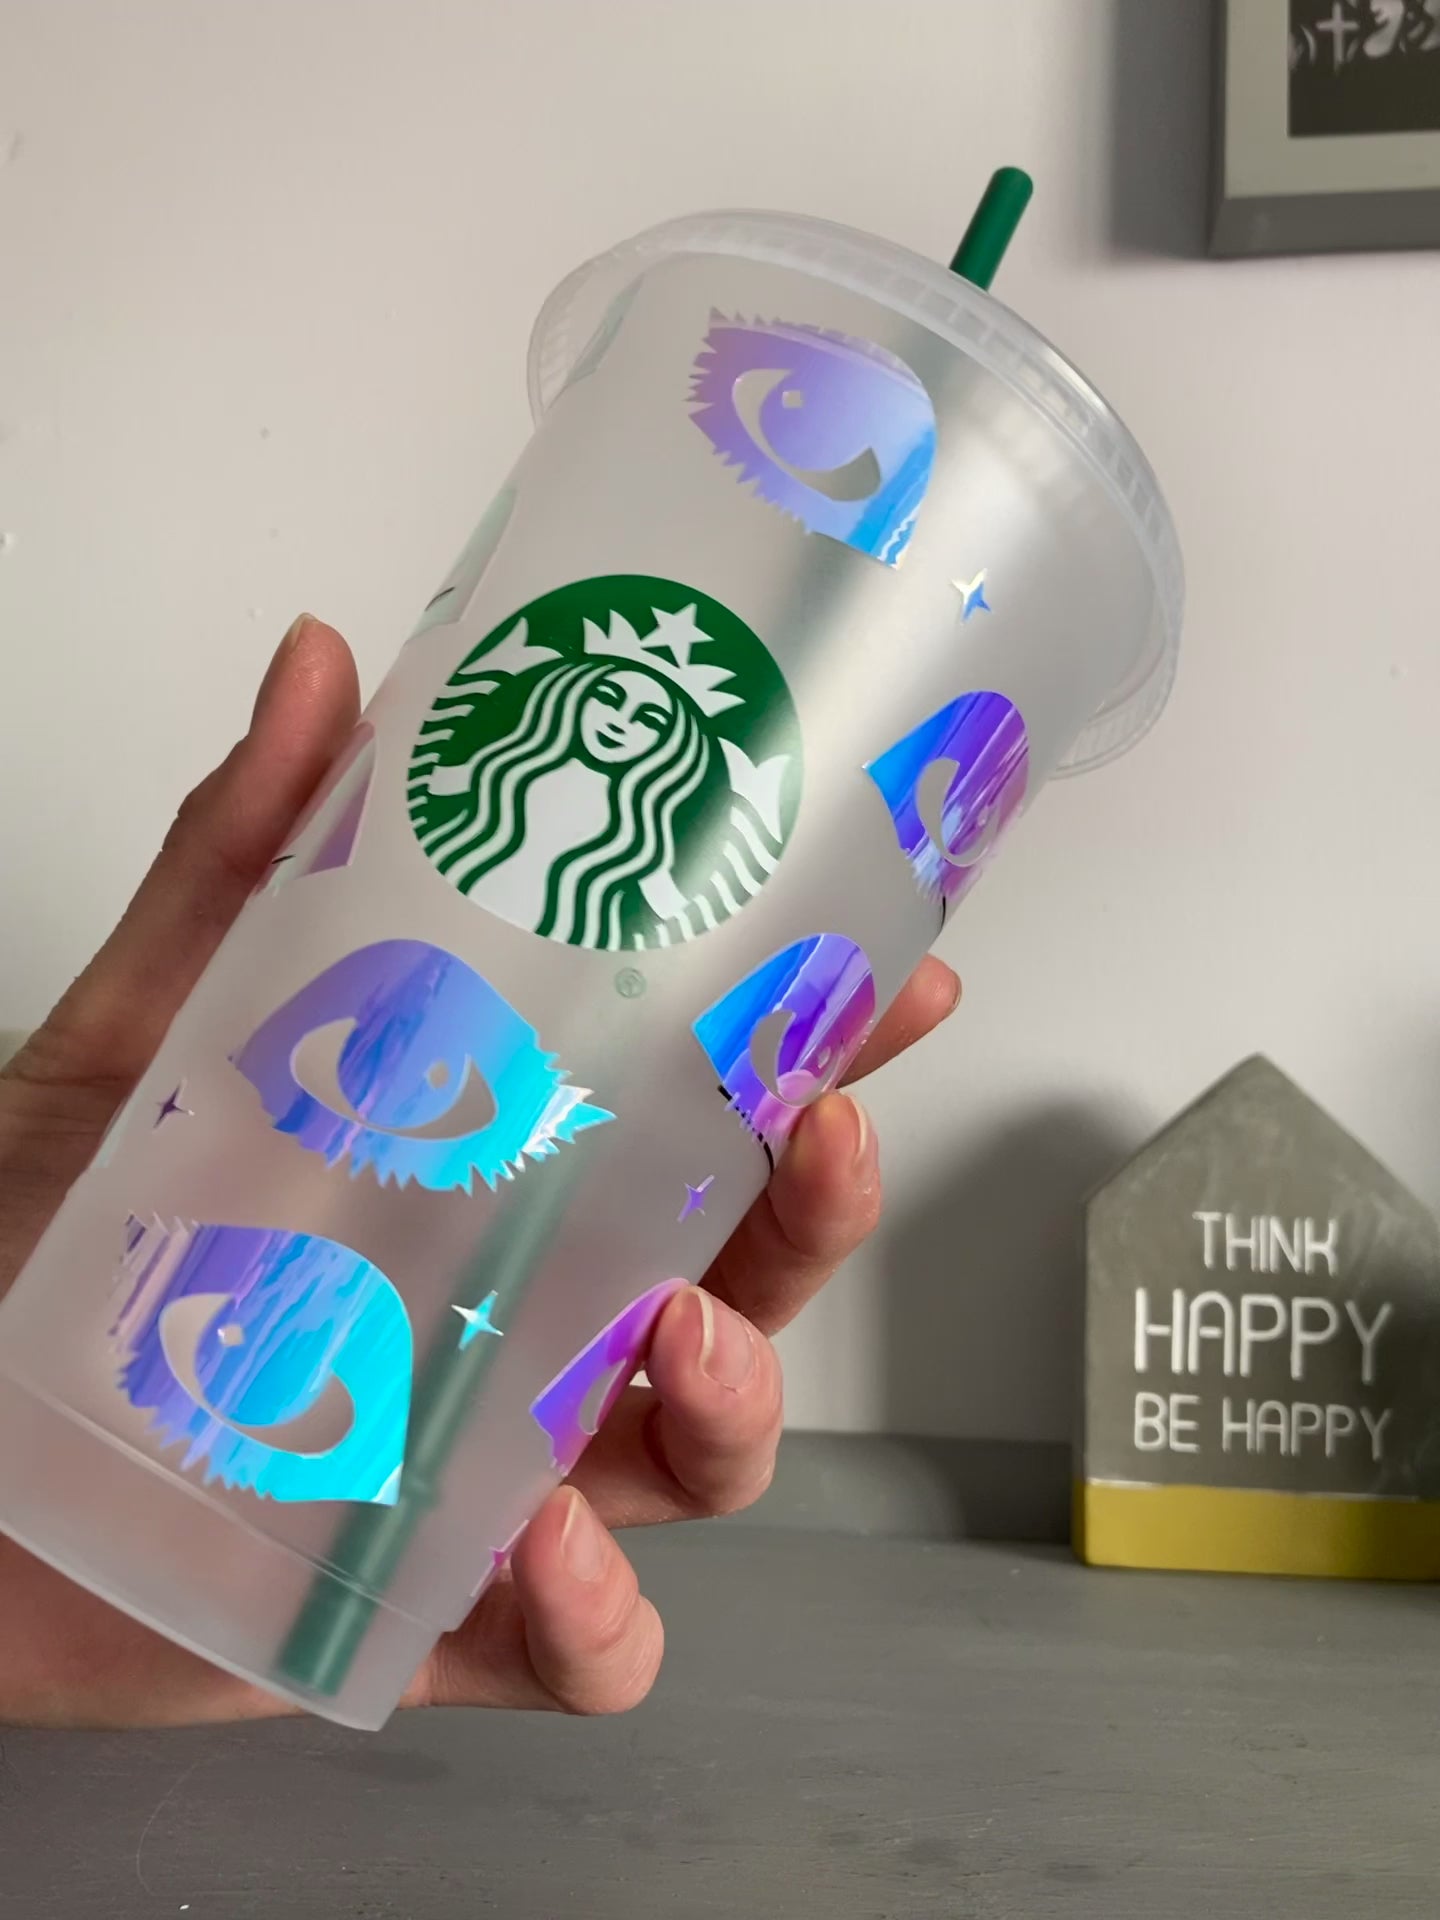 Custom Starbucks inspired reusable cold cup tumbler with straw - holog –  Those Crafty Cats